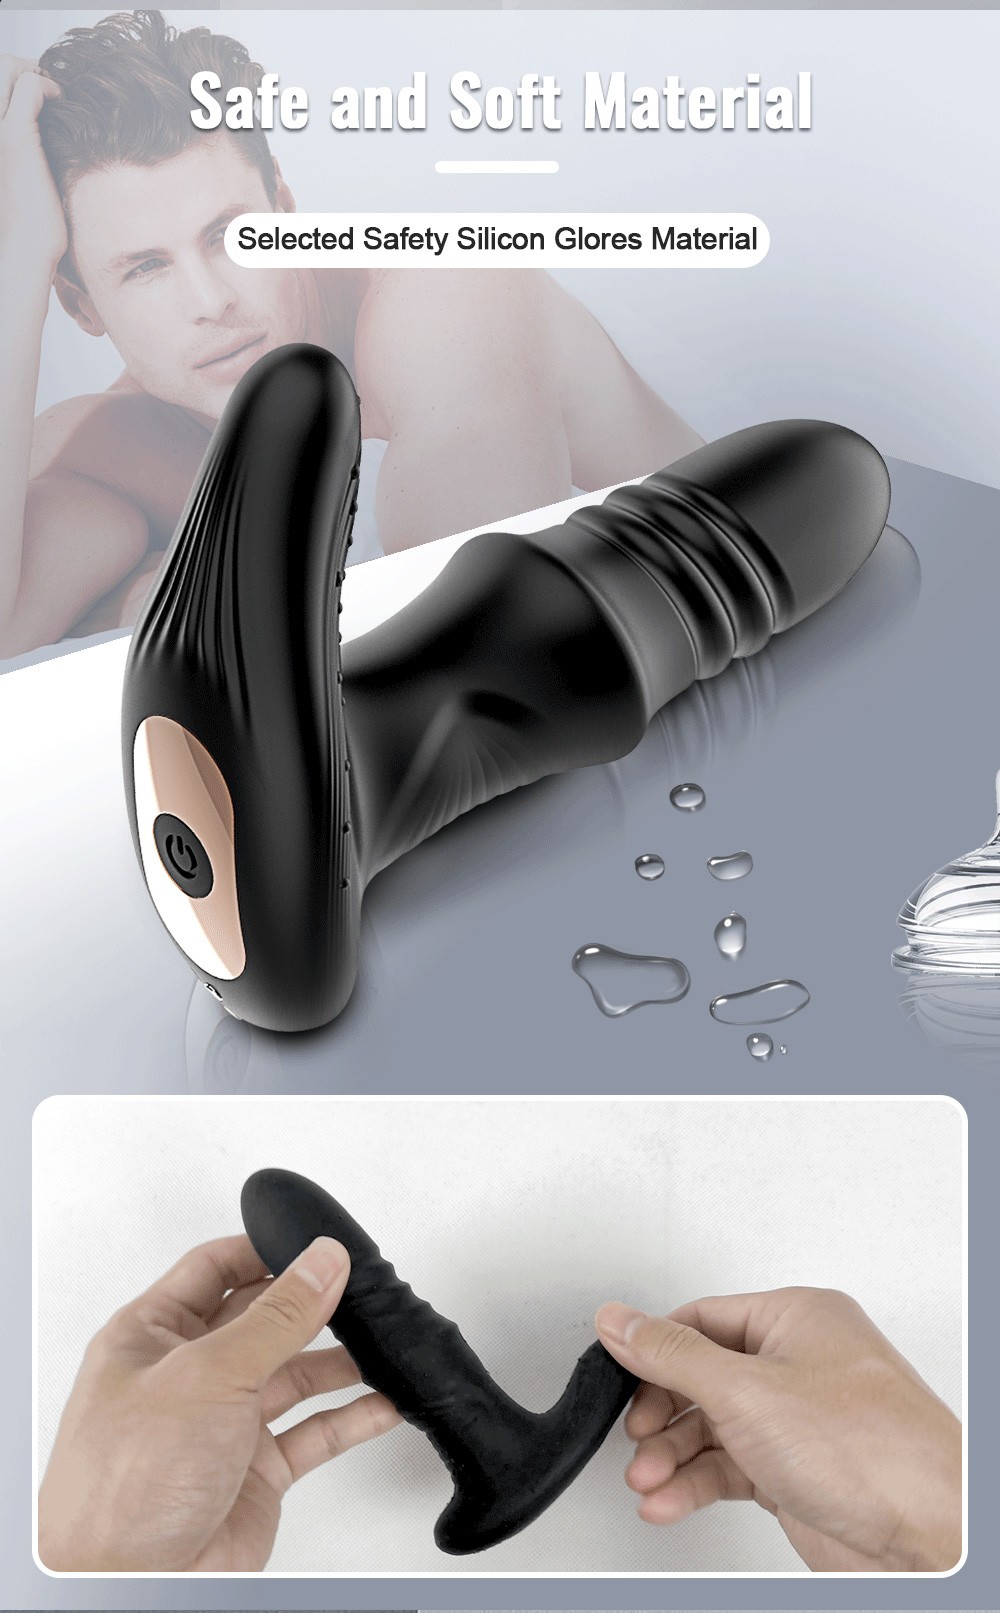 Remote Controlled Thrusting Vibrating Prostate Massagers